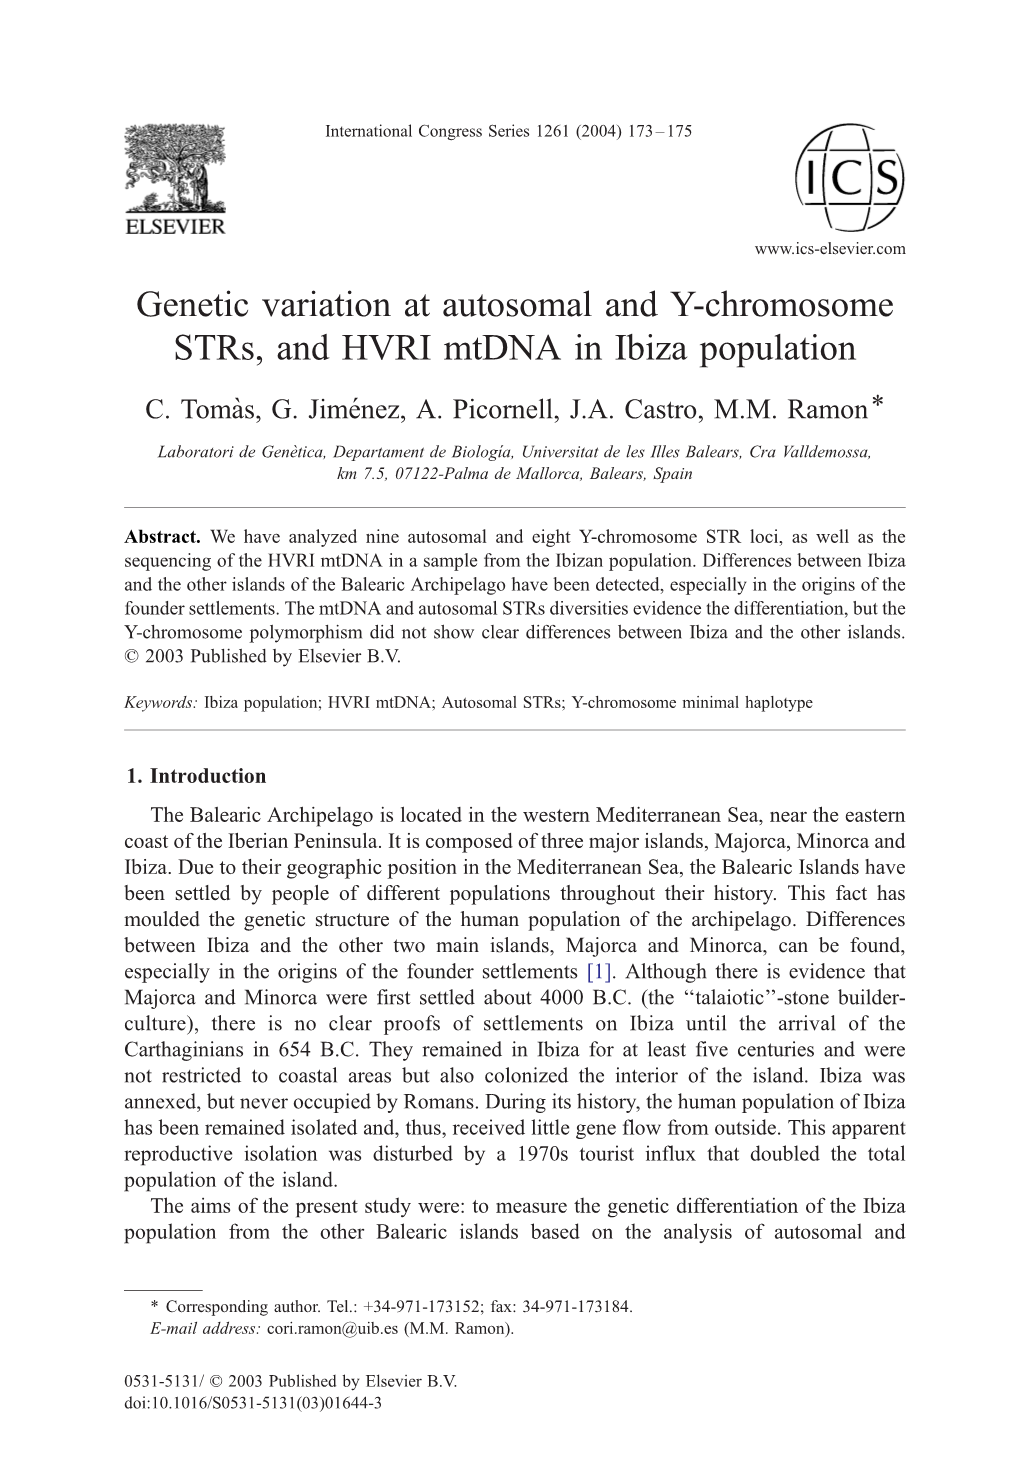 Genetic Variation at Autosomal and Y-Chromosome Strs, and HVRI Mtdna in Ibiza Population